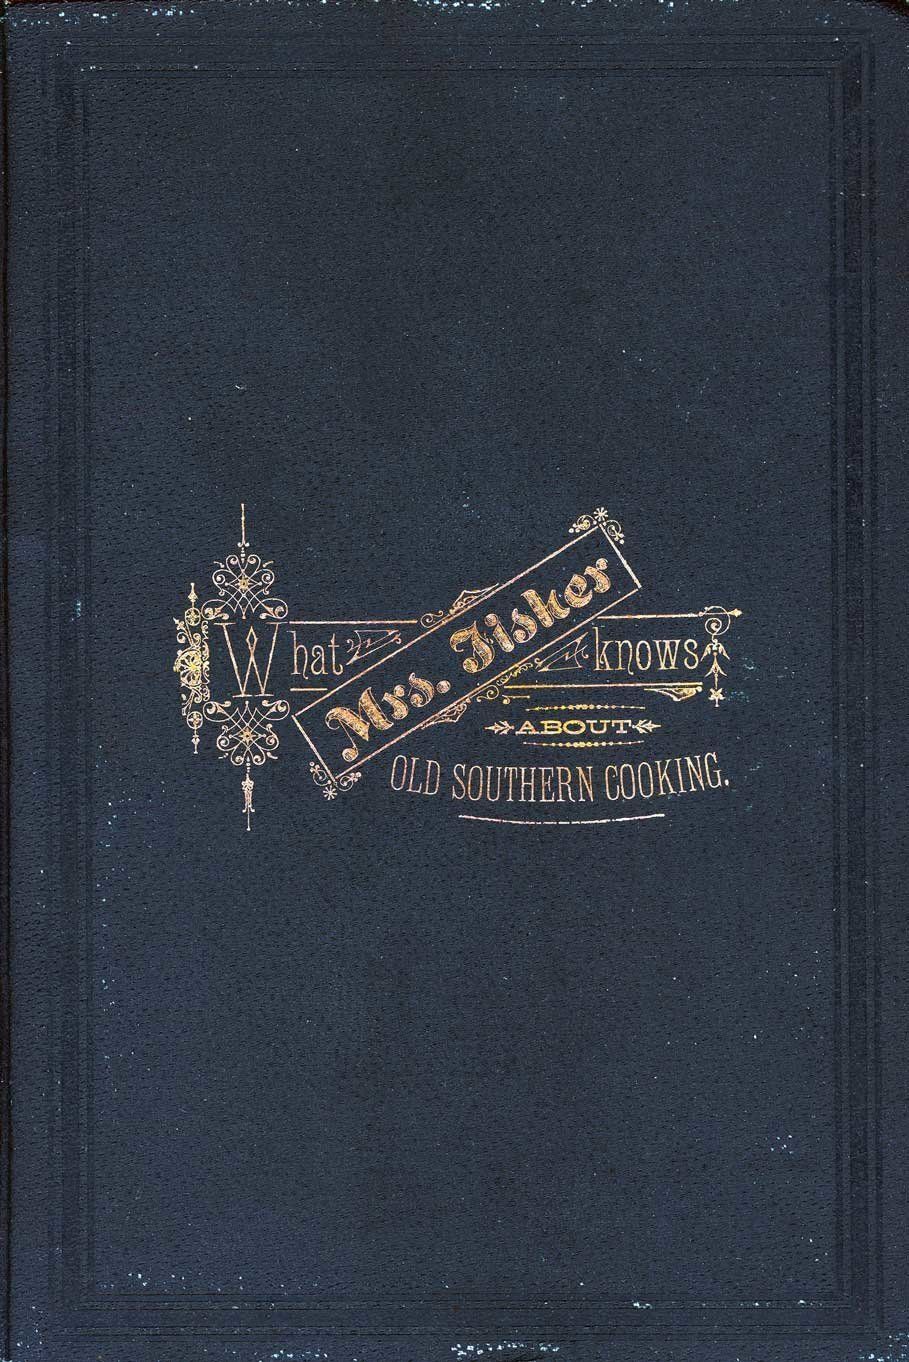 A copy of “What Mrs. Fisher Knows About Old Southern Cooking.” 